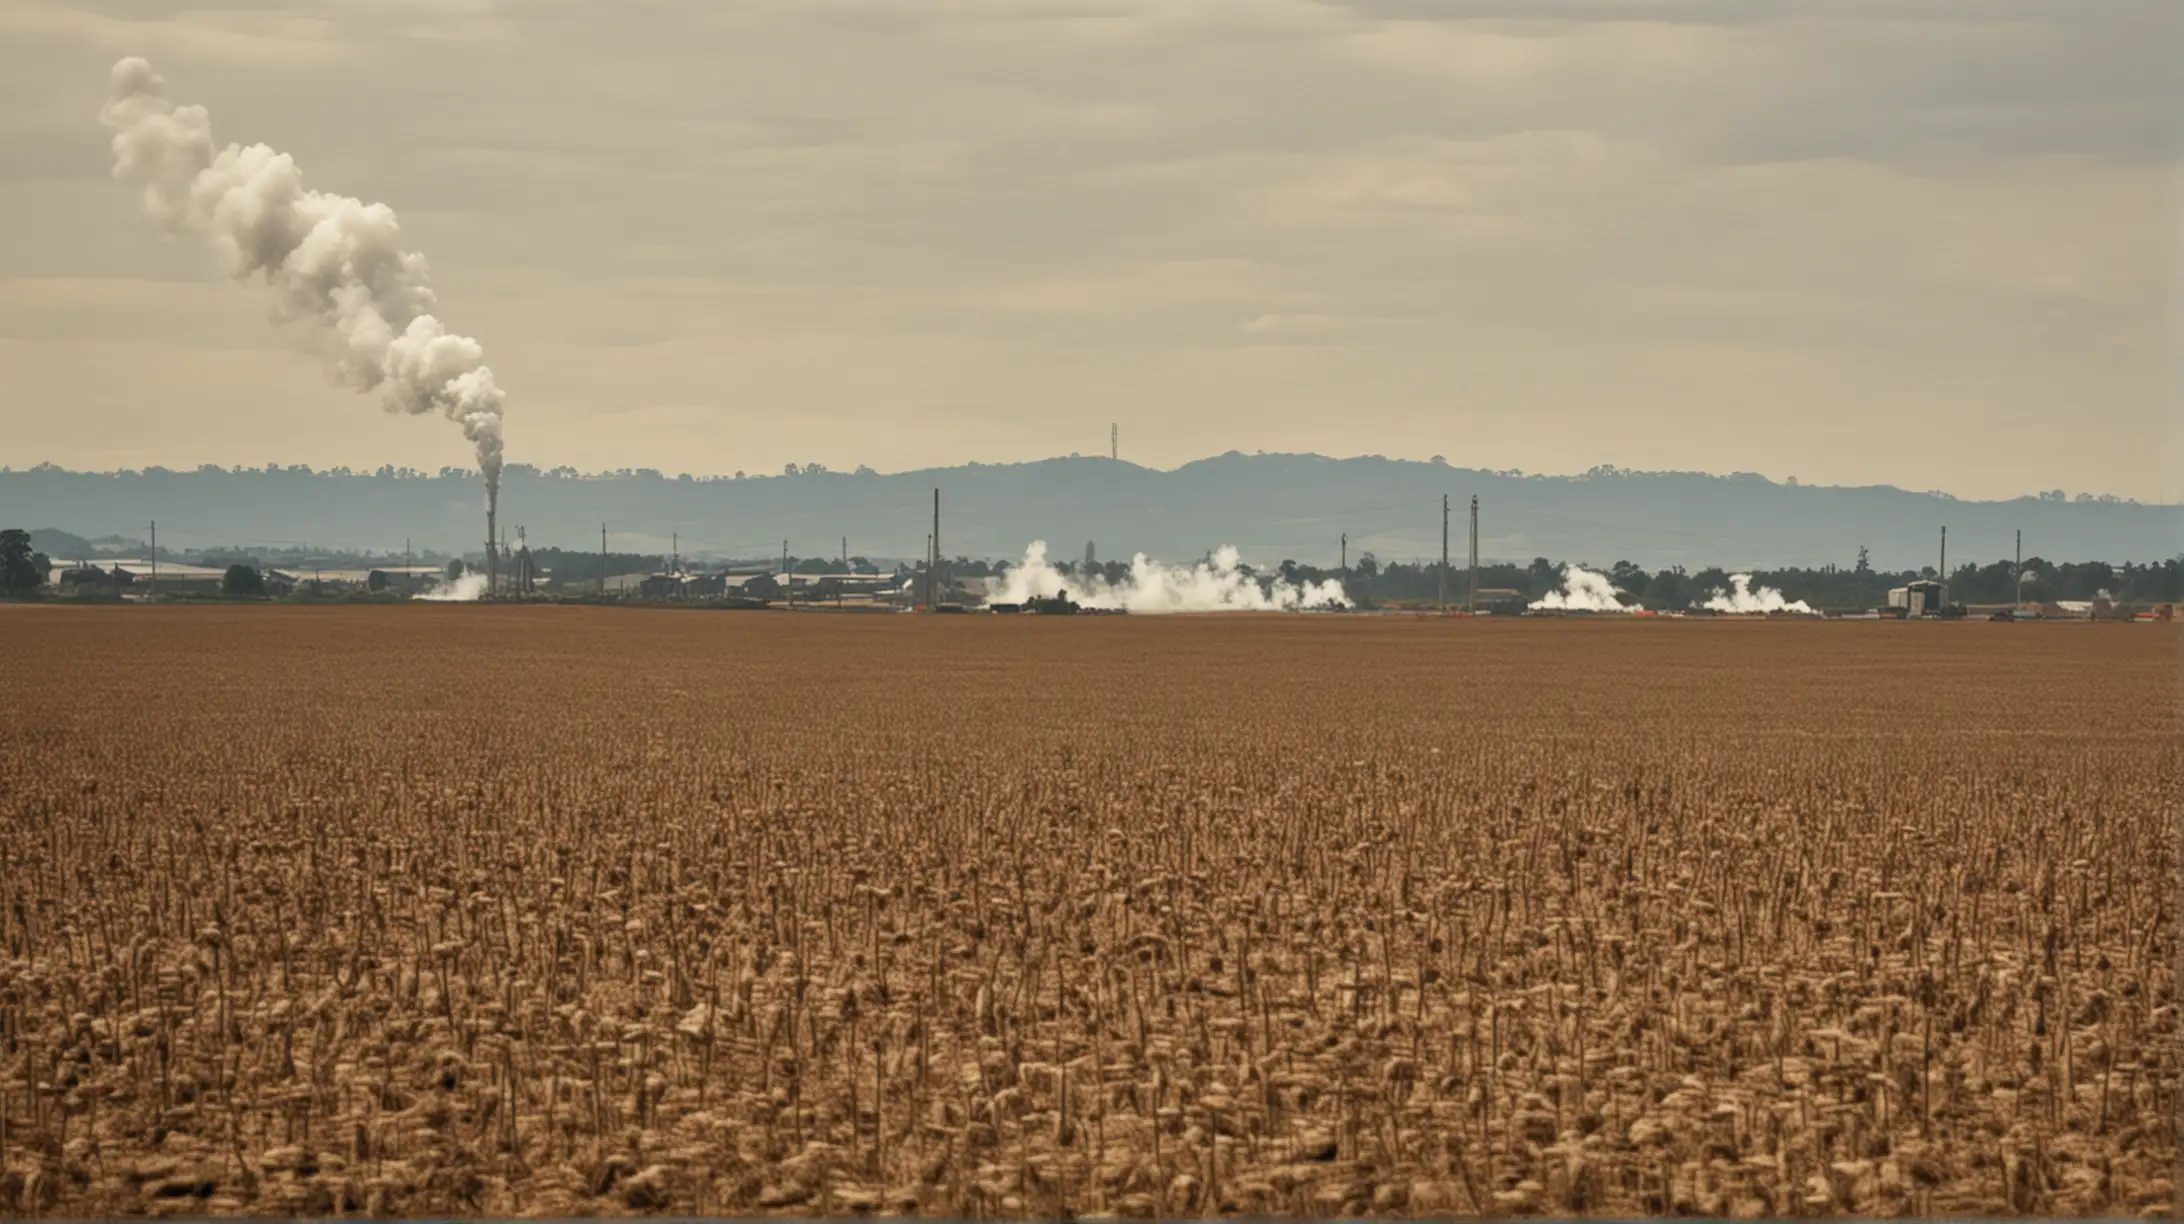 Rural Landscape with Industrial Smoke in the Distance